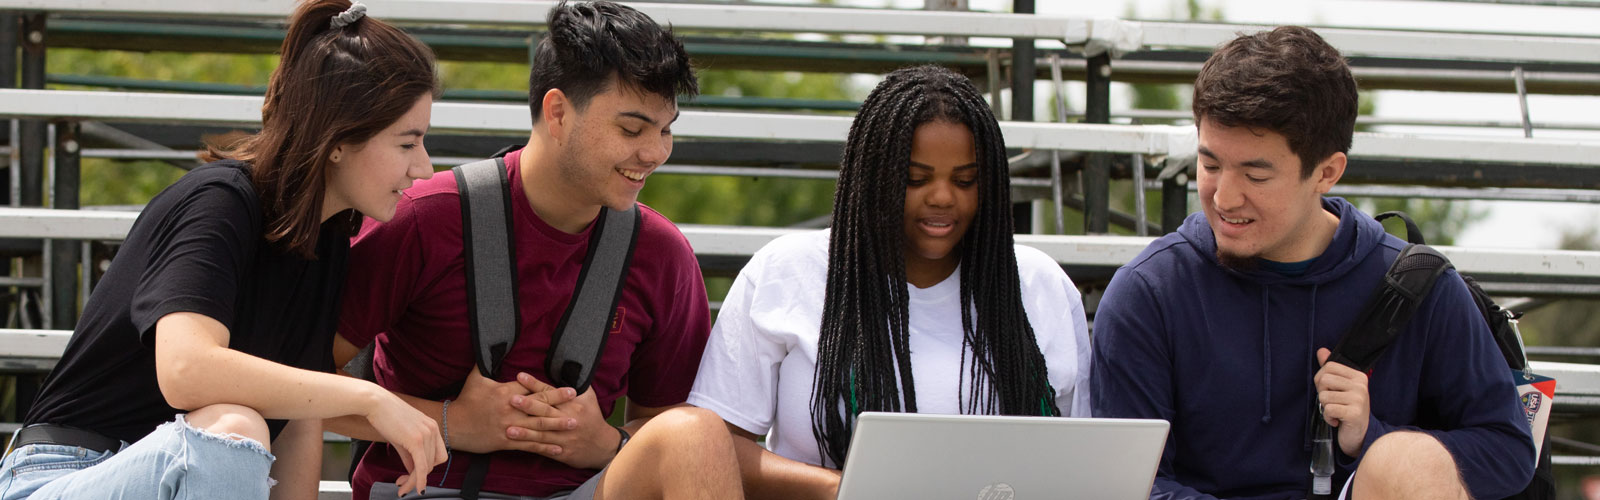 4 students sitting on bleachers looking at laptop and smiling